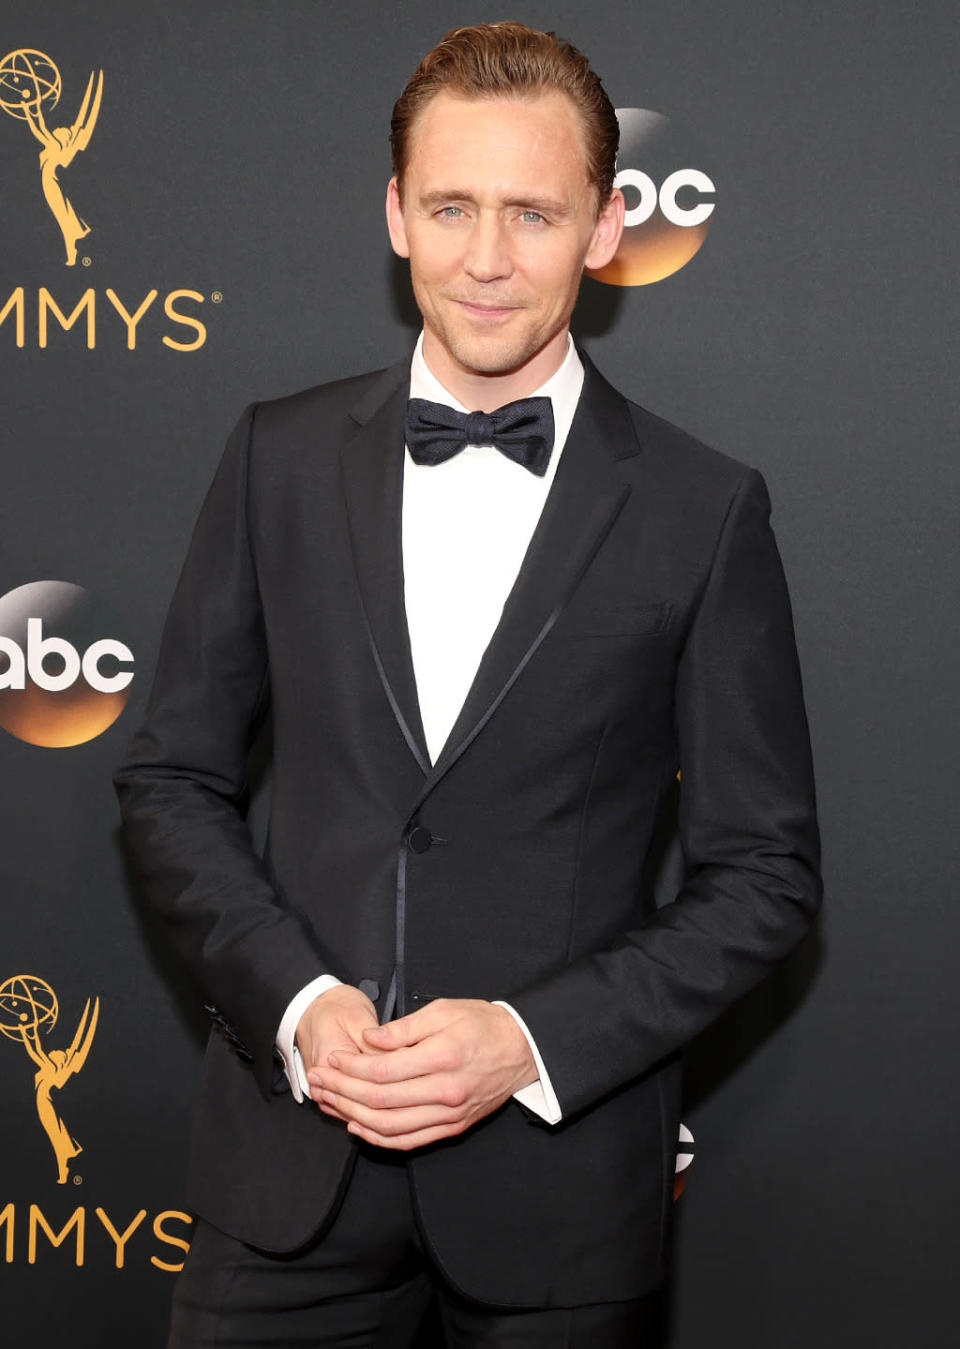 <p>Tom Hiddleston arrives at the 68th Emmy Awards at the Microsoft Theater on September 18, 2016 in Los Angeles, Calif. (Photo by Getty Images)</p>